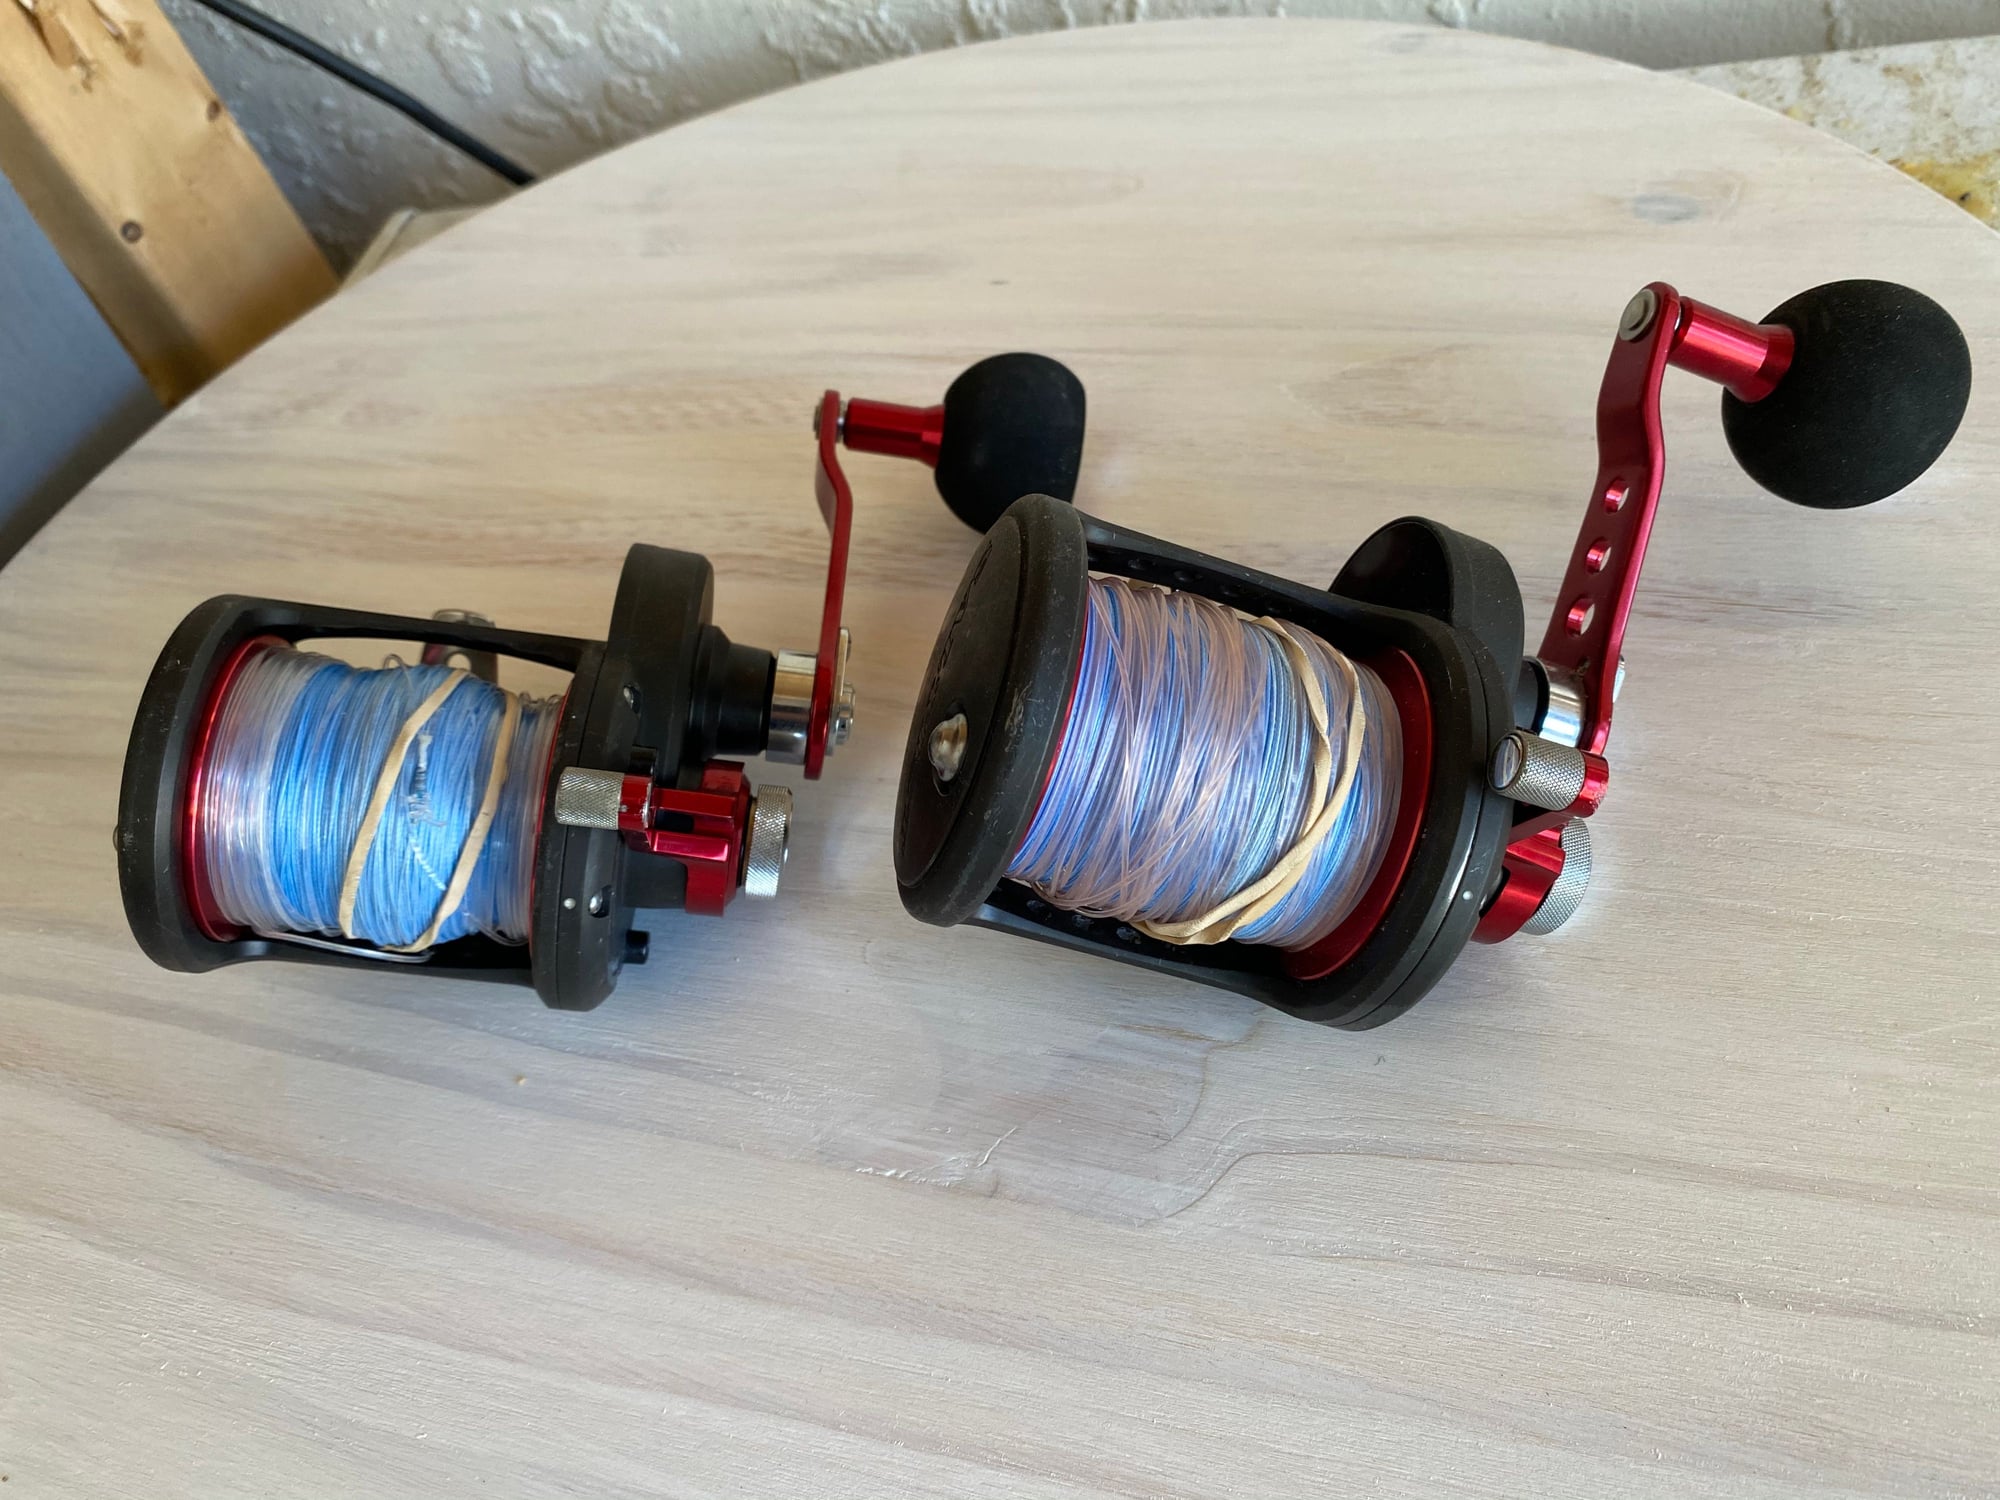 Daiwa STTLD50HSH Saltist Single Hyper Speed Lever Drag Conventional Reels (2)  - The Hull Truth - Boating and Fishing Forum